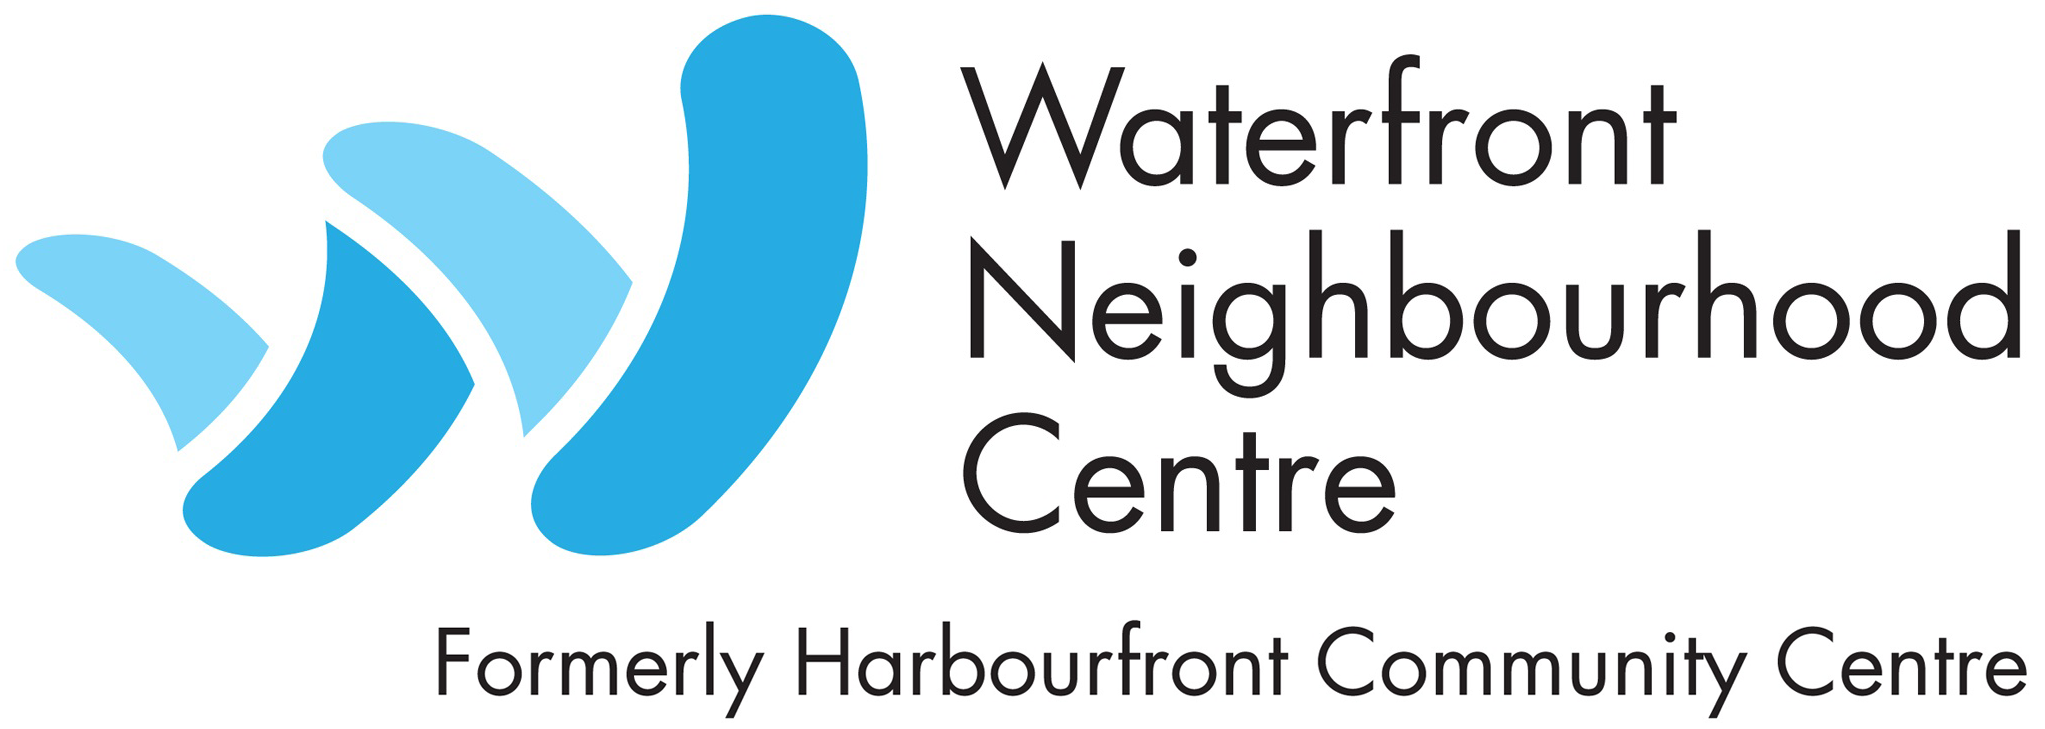 WaterfrontNeighbourhoodCentre.png